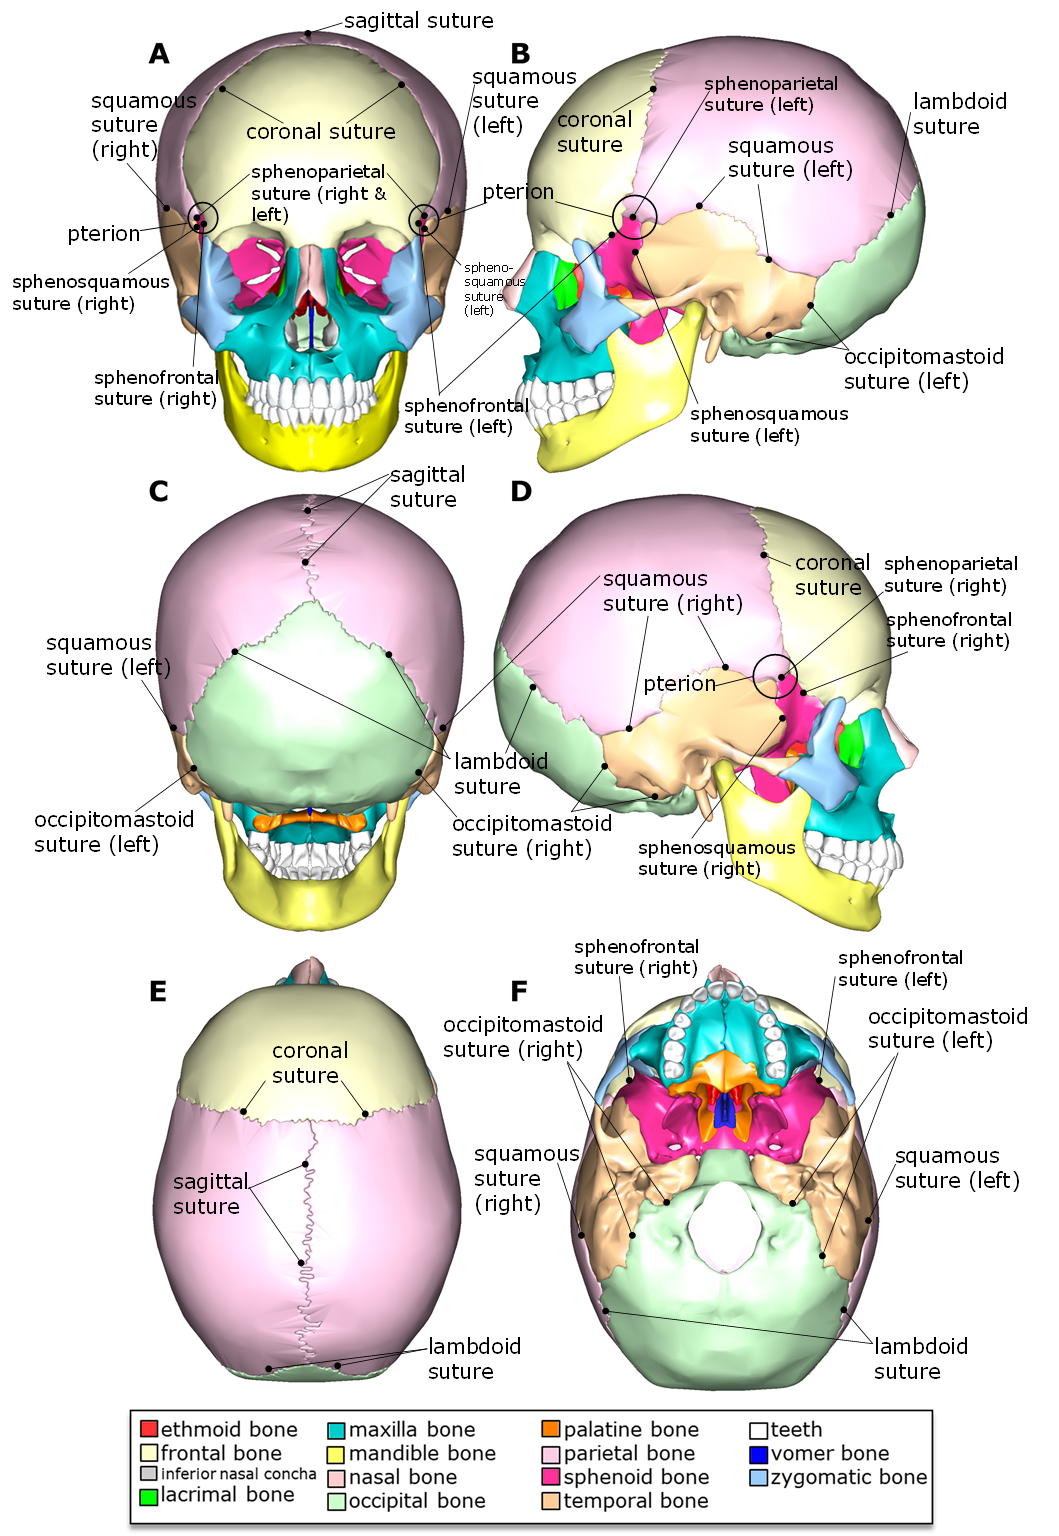 Skull diagram showing the sutures of the skull.